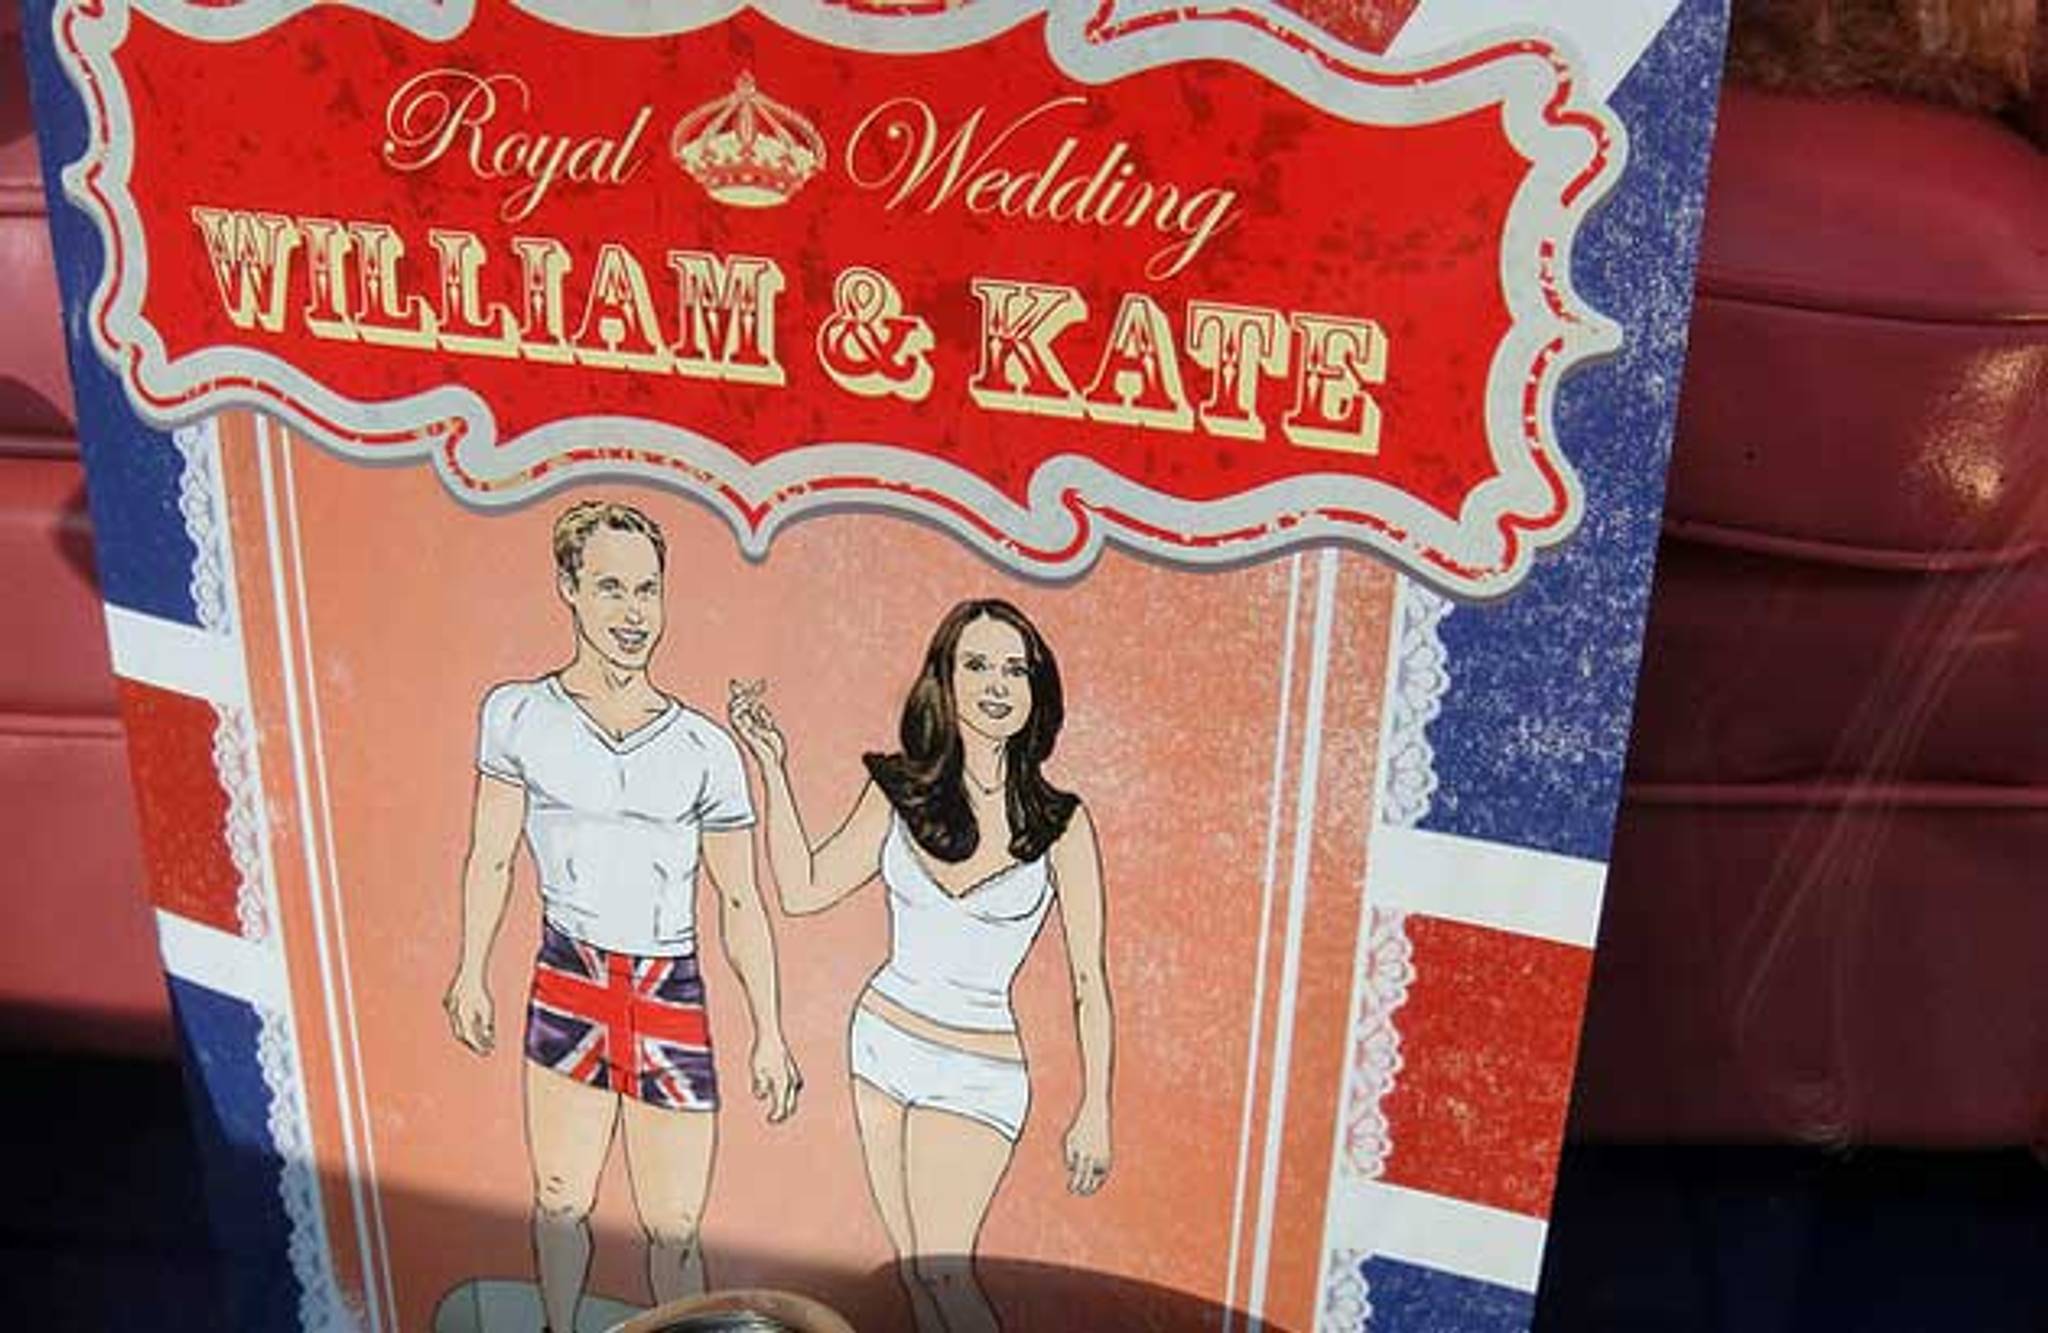 Ringing the changes: the Royal Wedding and Britishness